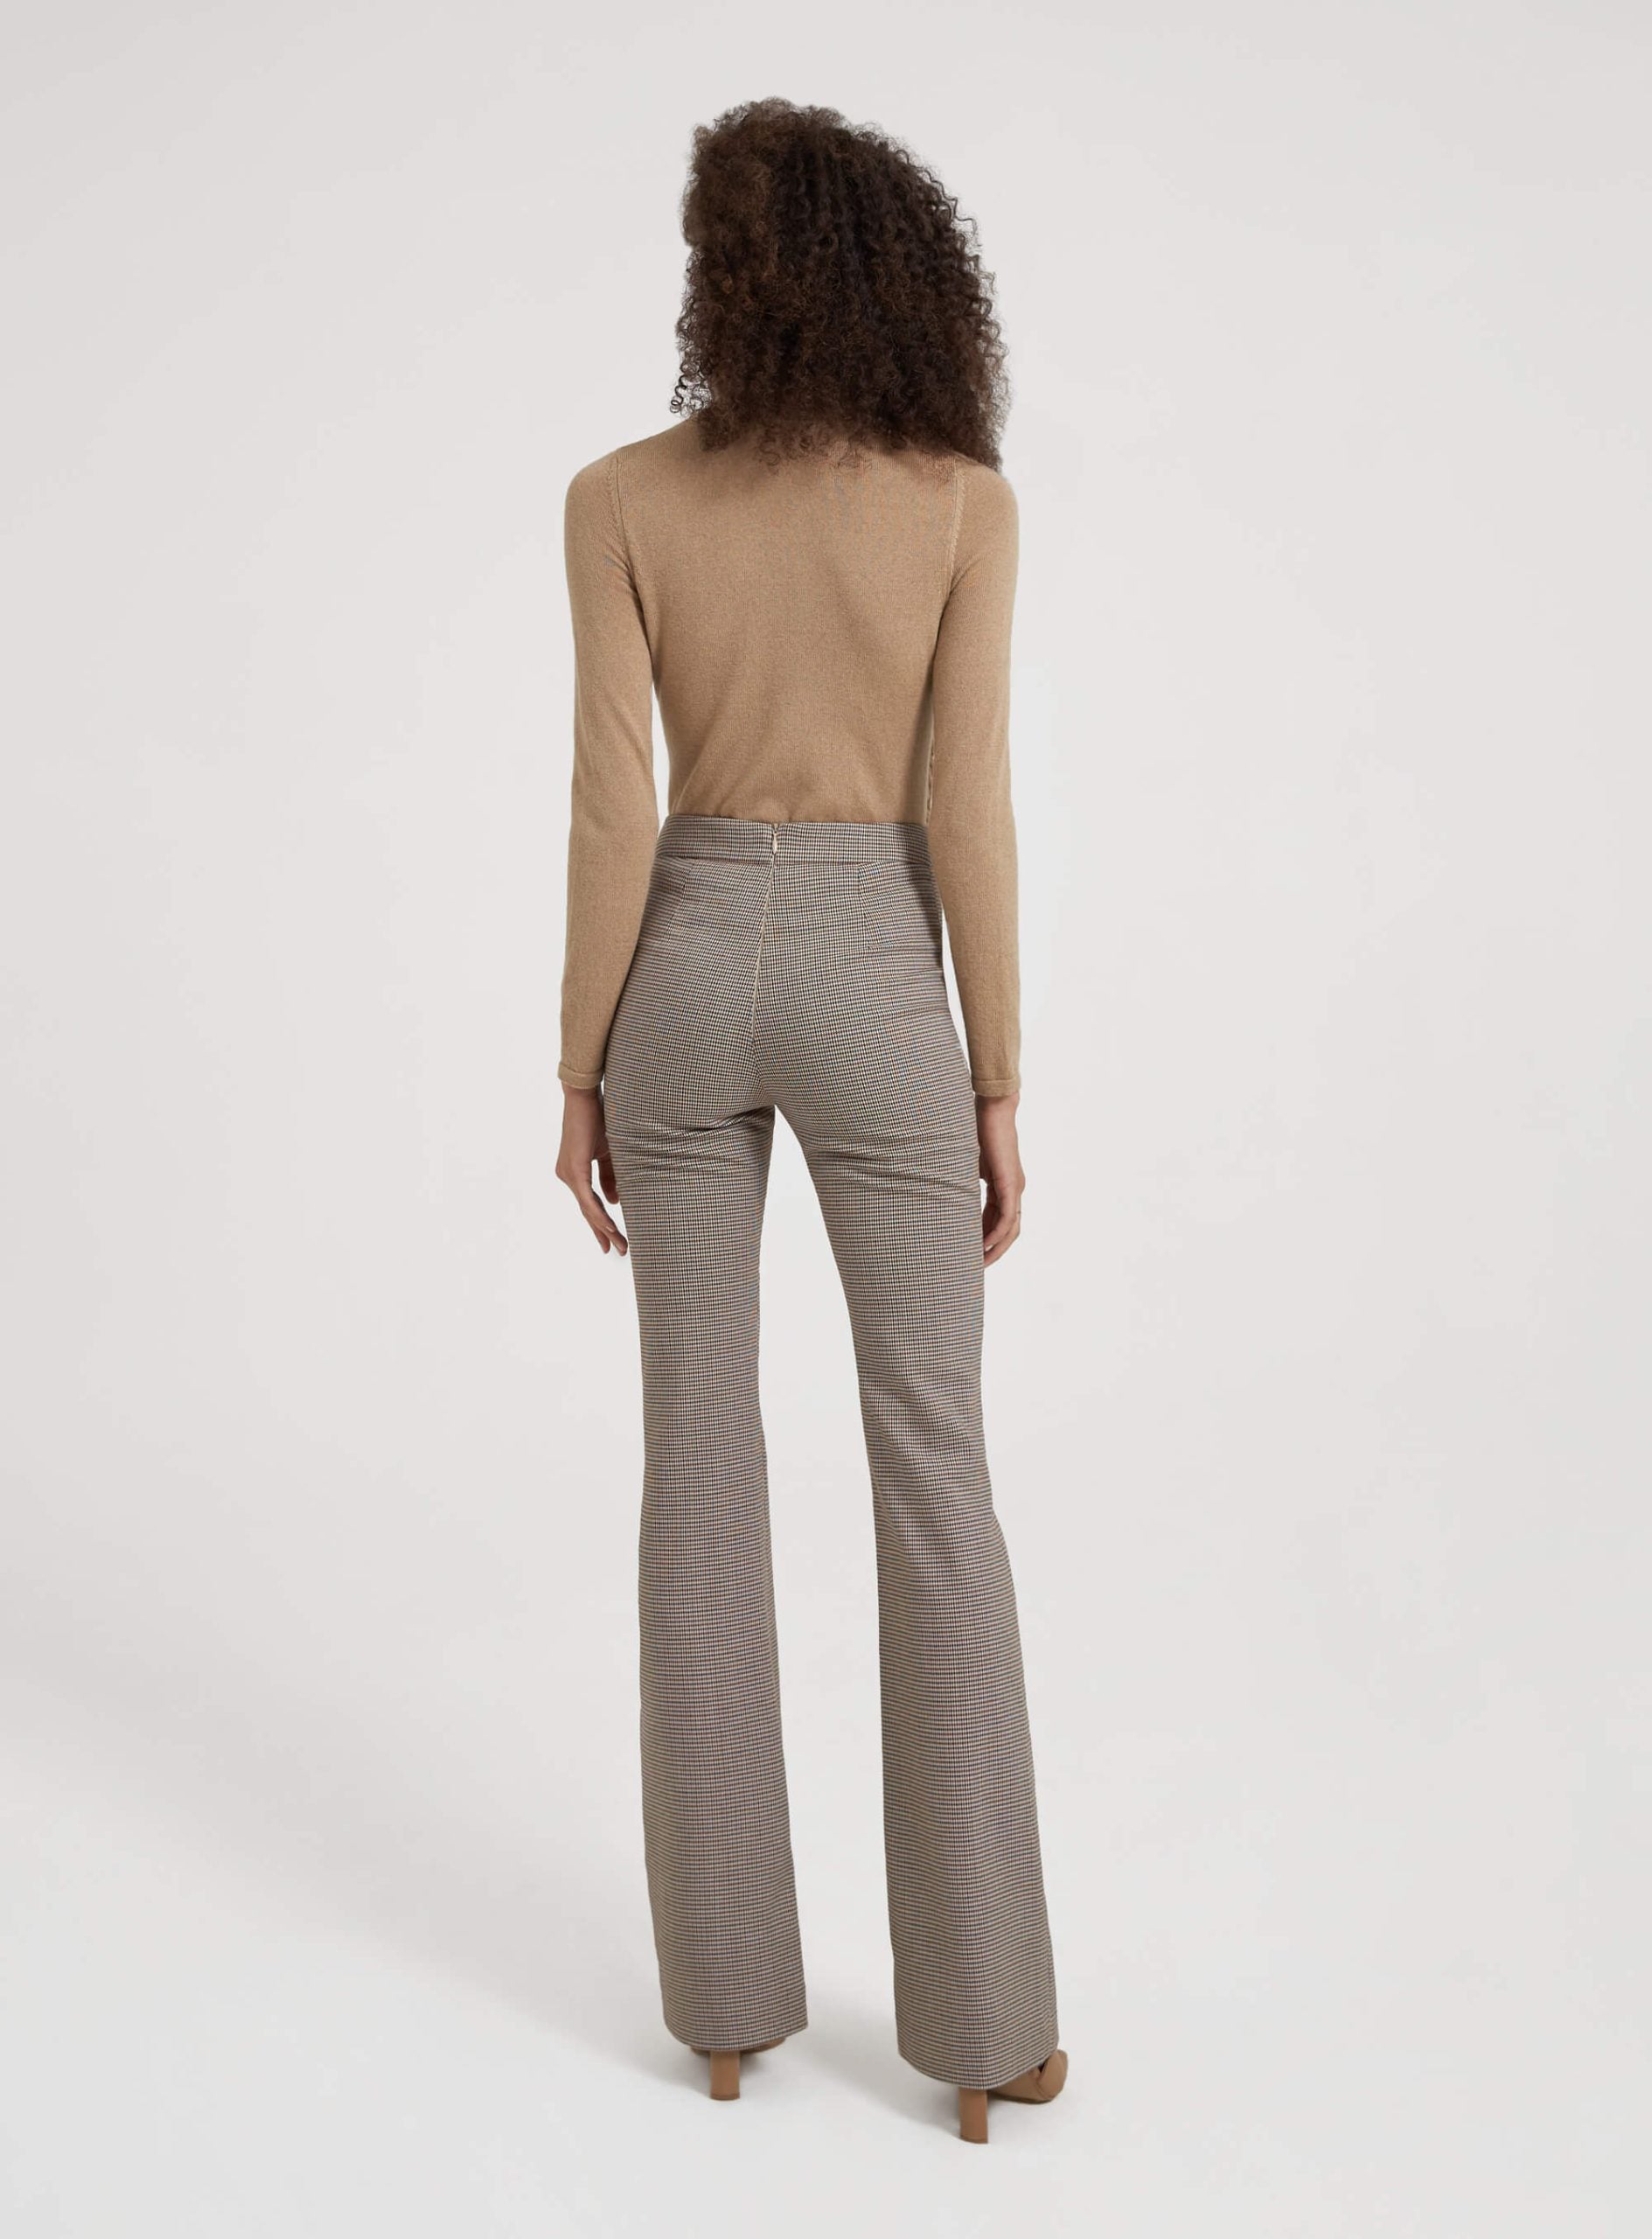 Matisse Trousers